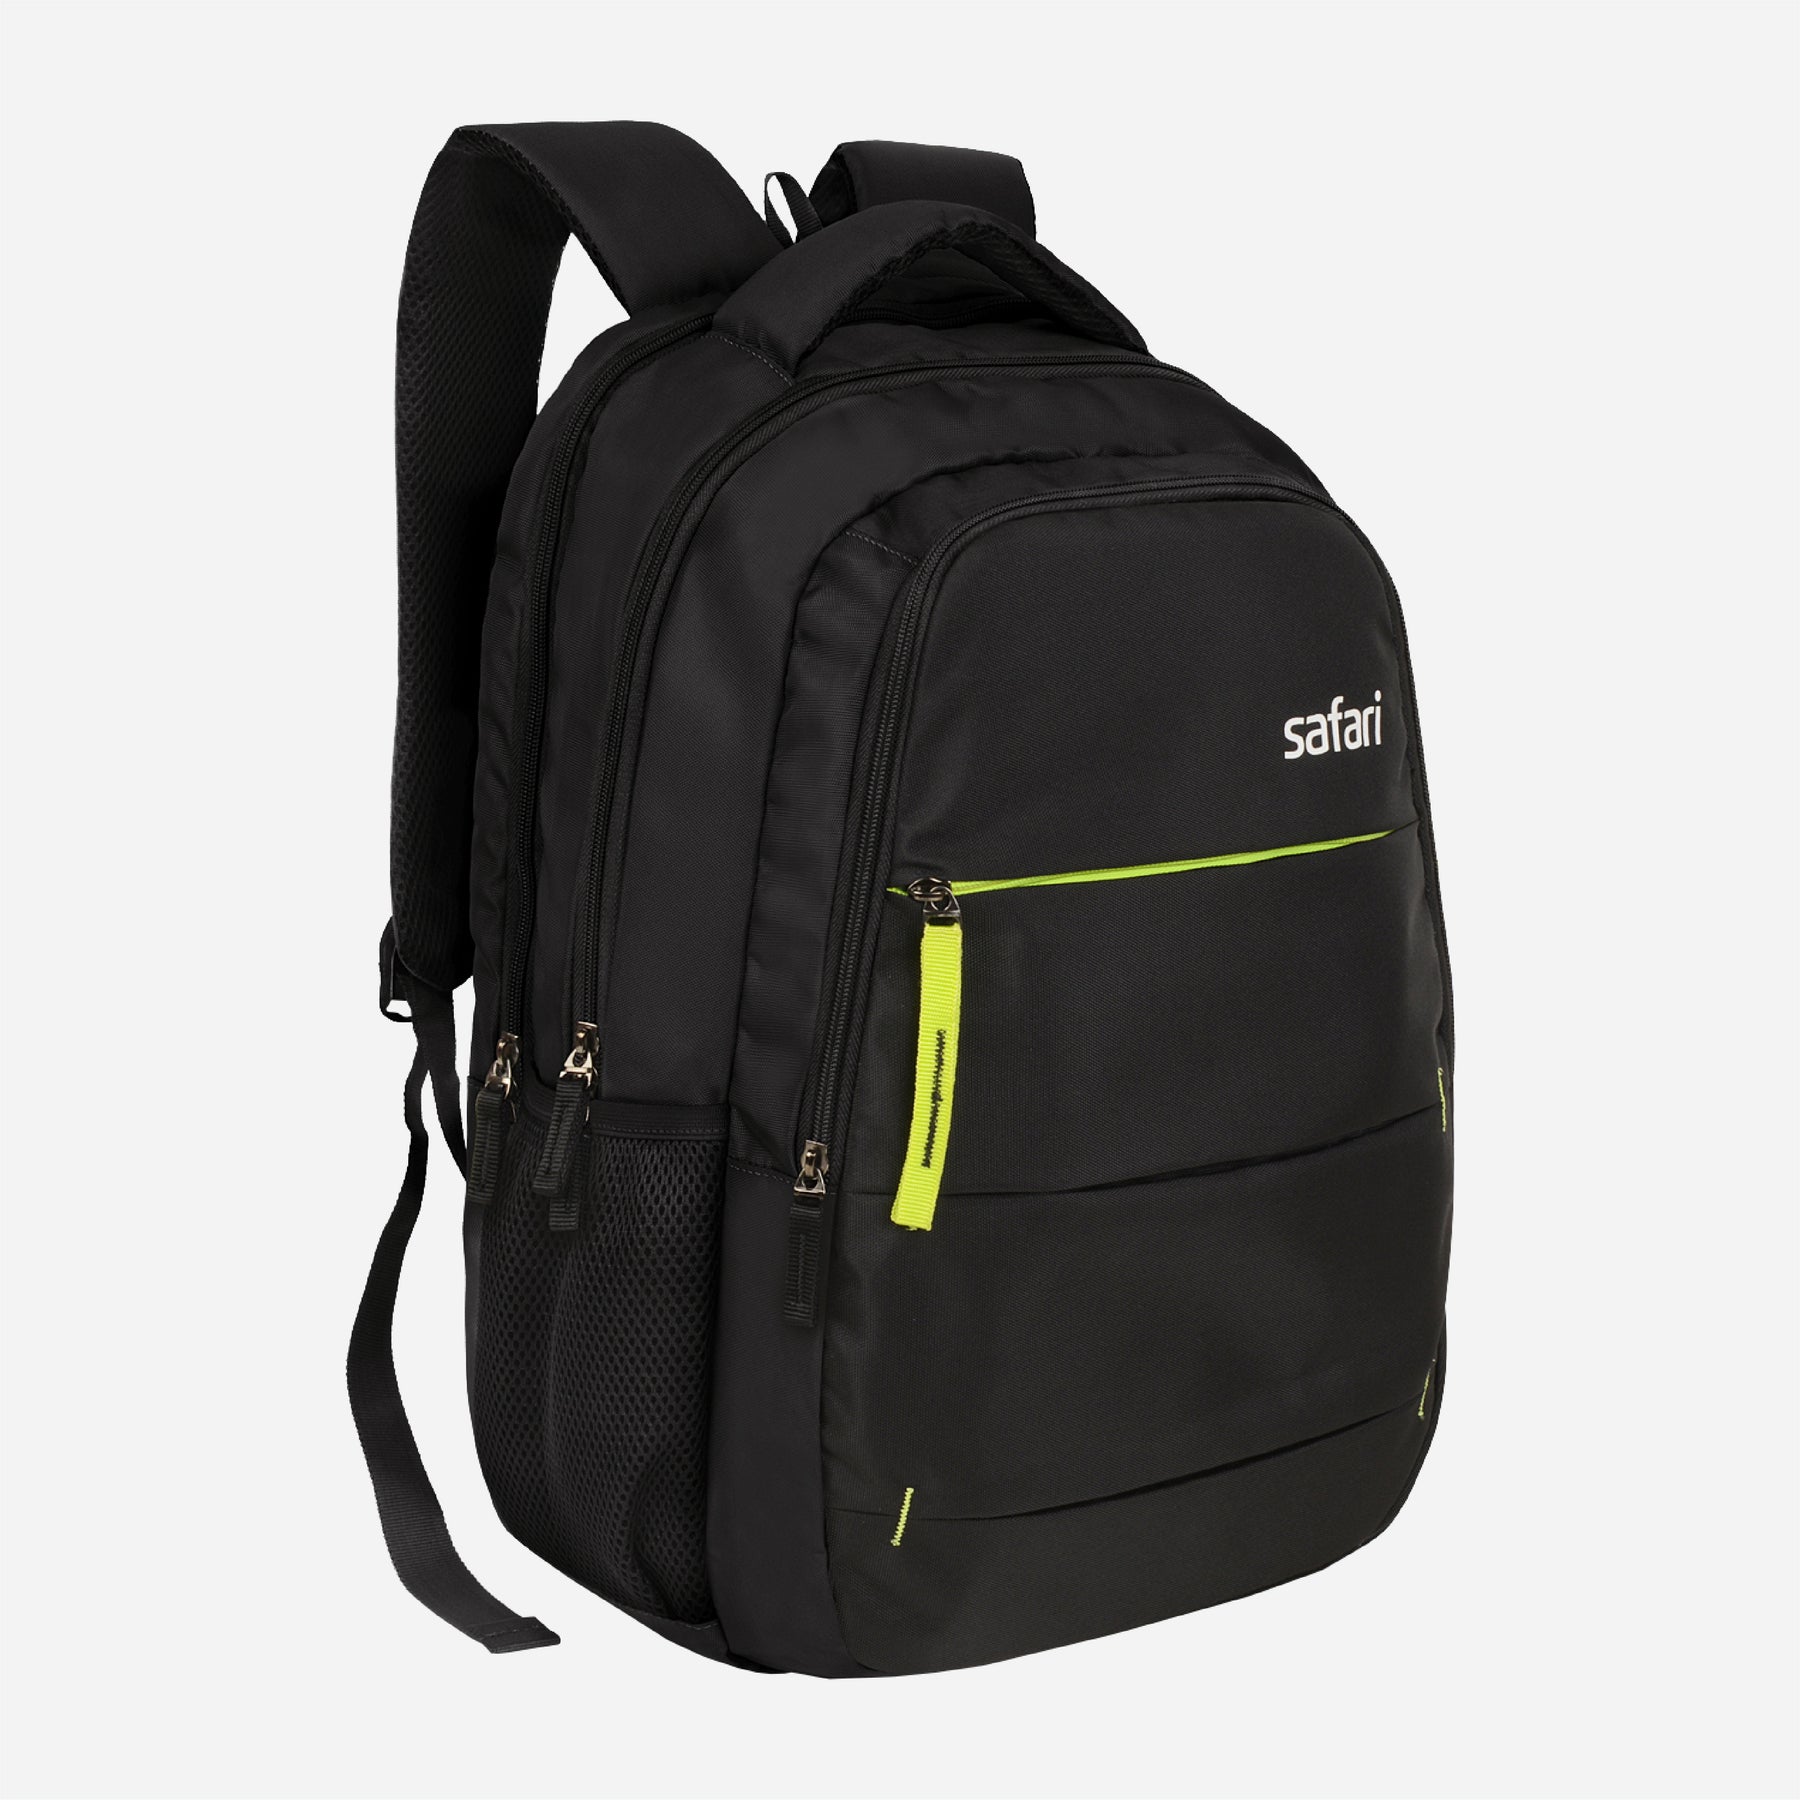 Safari Snap 30L Black Laptop Backpack with Easy Access Pockets